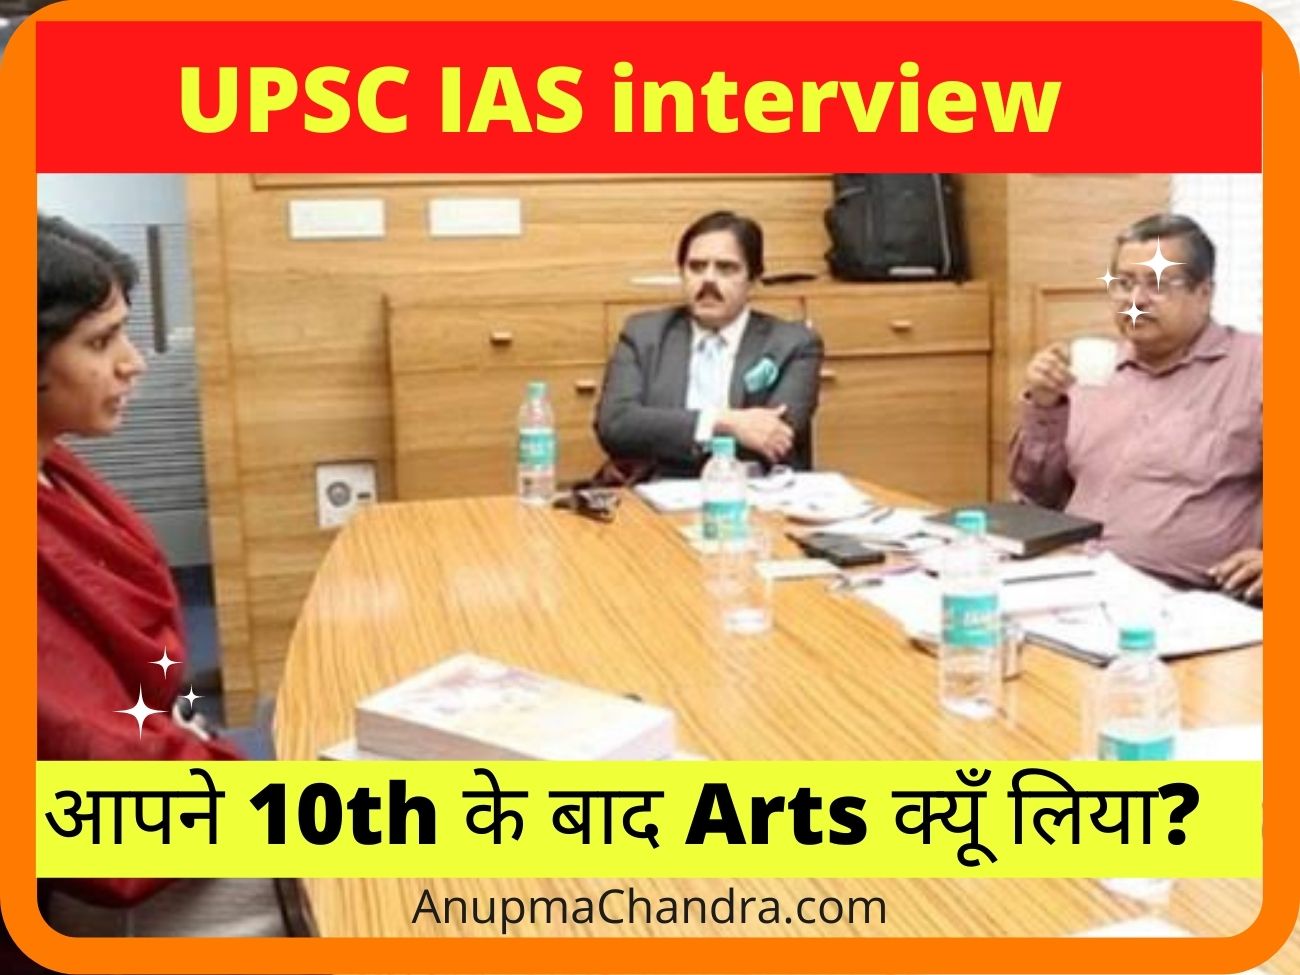 UPSC IAS Interview Questions in Hindi with answers